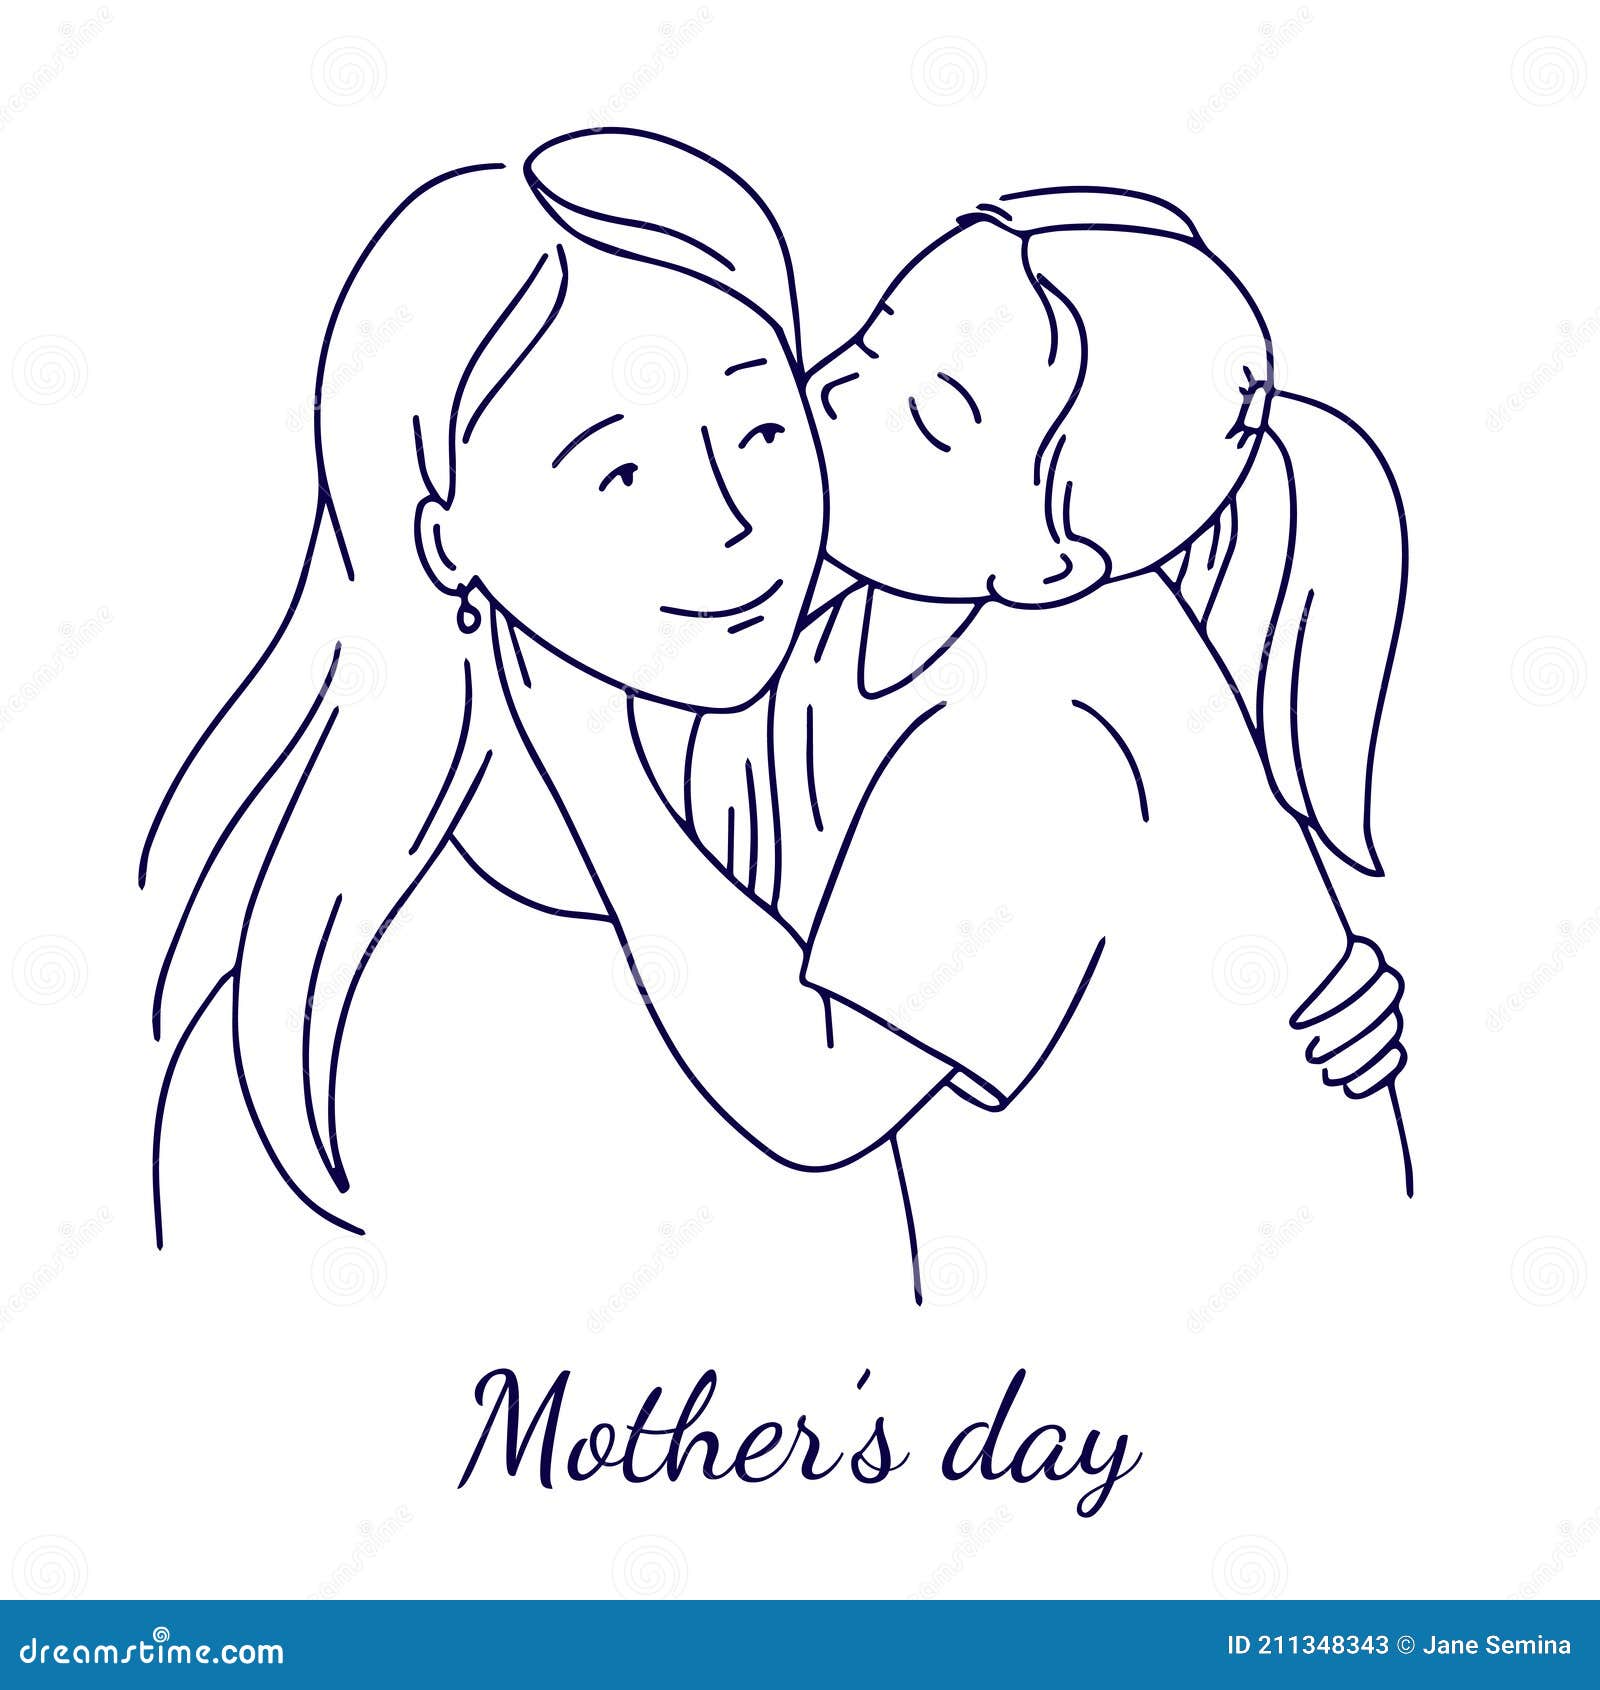 Mother's day drawing easy | How to draw mother's day poster with oil  pastels colour step by step - YouTube